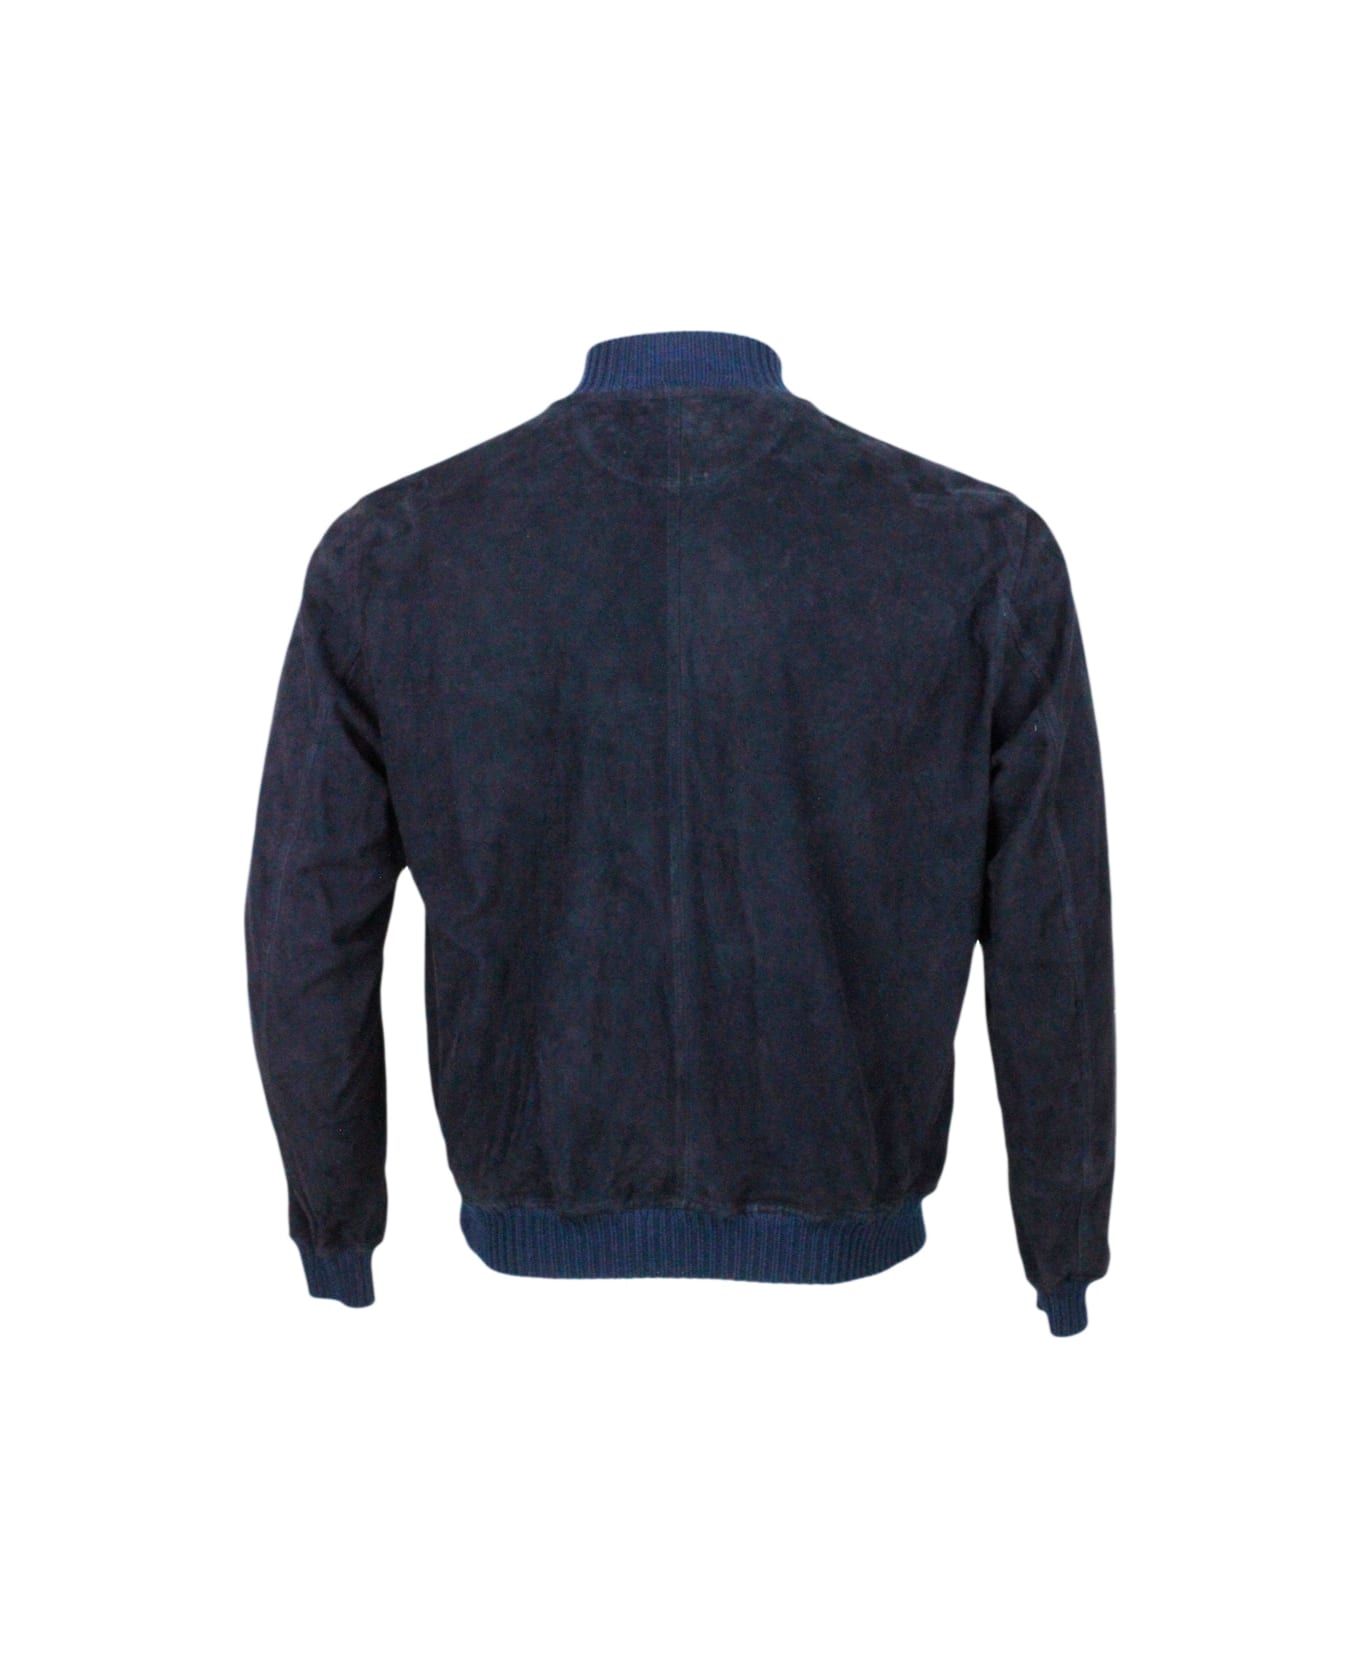 Kired Igor Jacket In Fine Unlined Light Lambskin Suede With Button Closure And Knitted Finishes - Blu